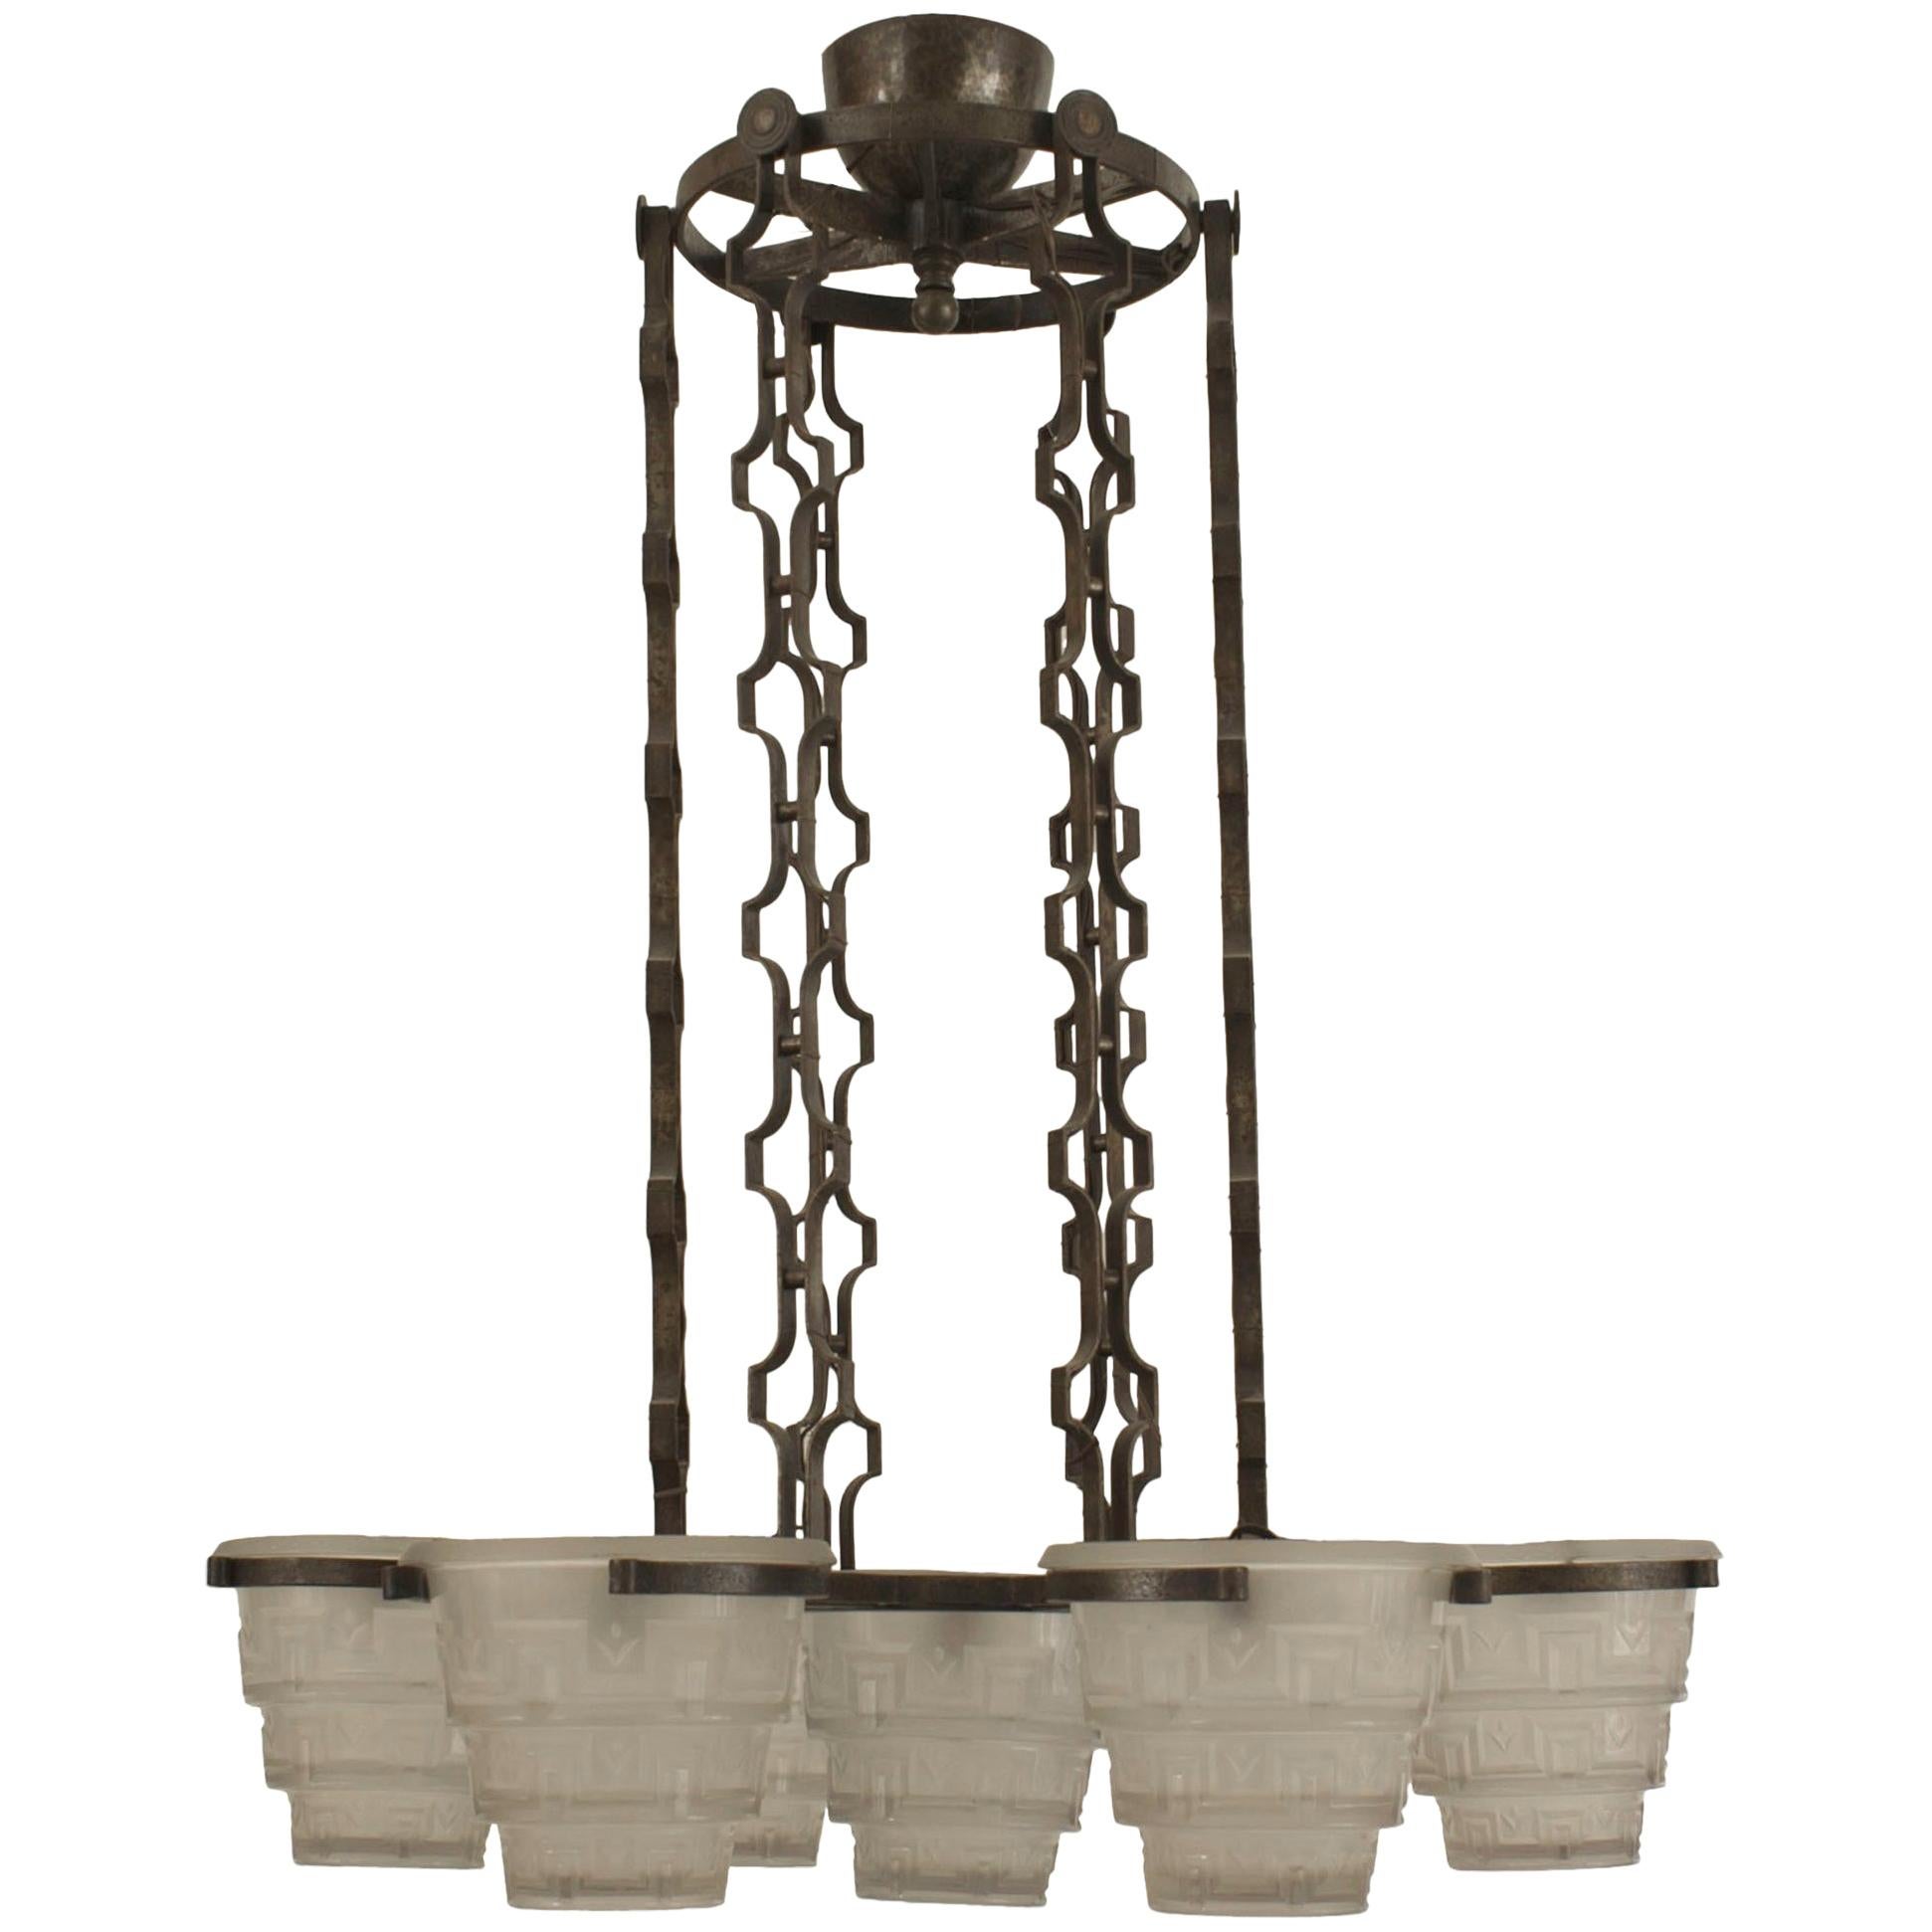 Edgar Brandt French Art Deco Brandt Wrought Iron and Glass Chandelier For Sale